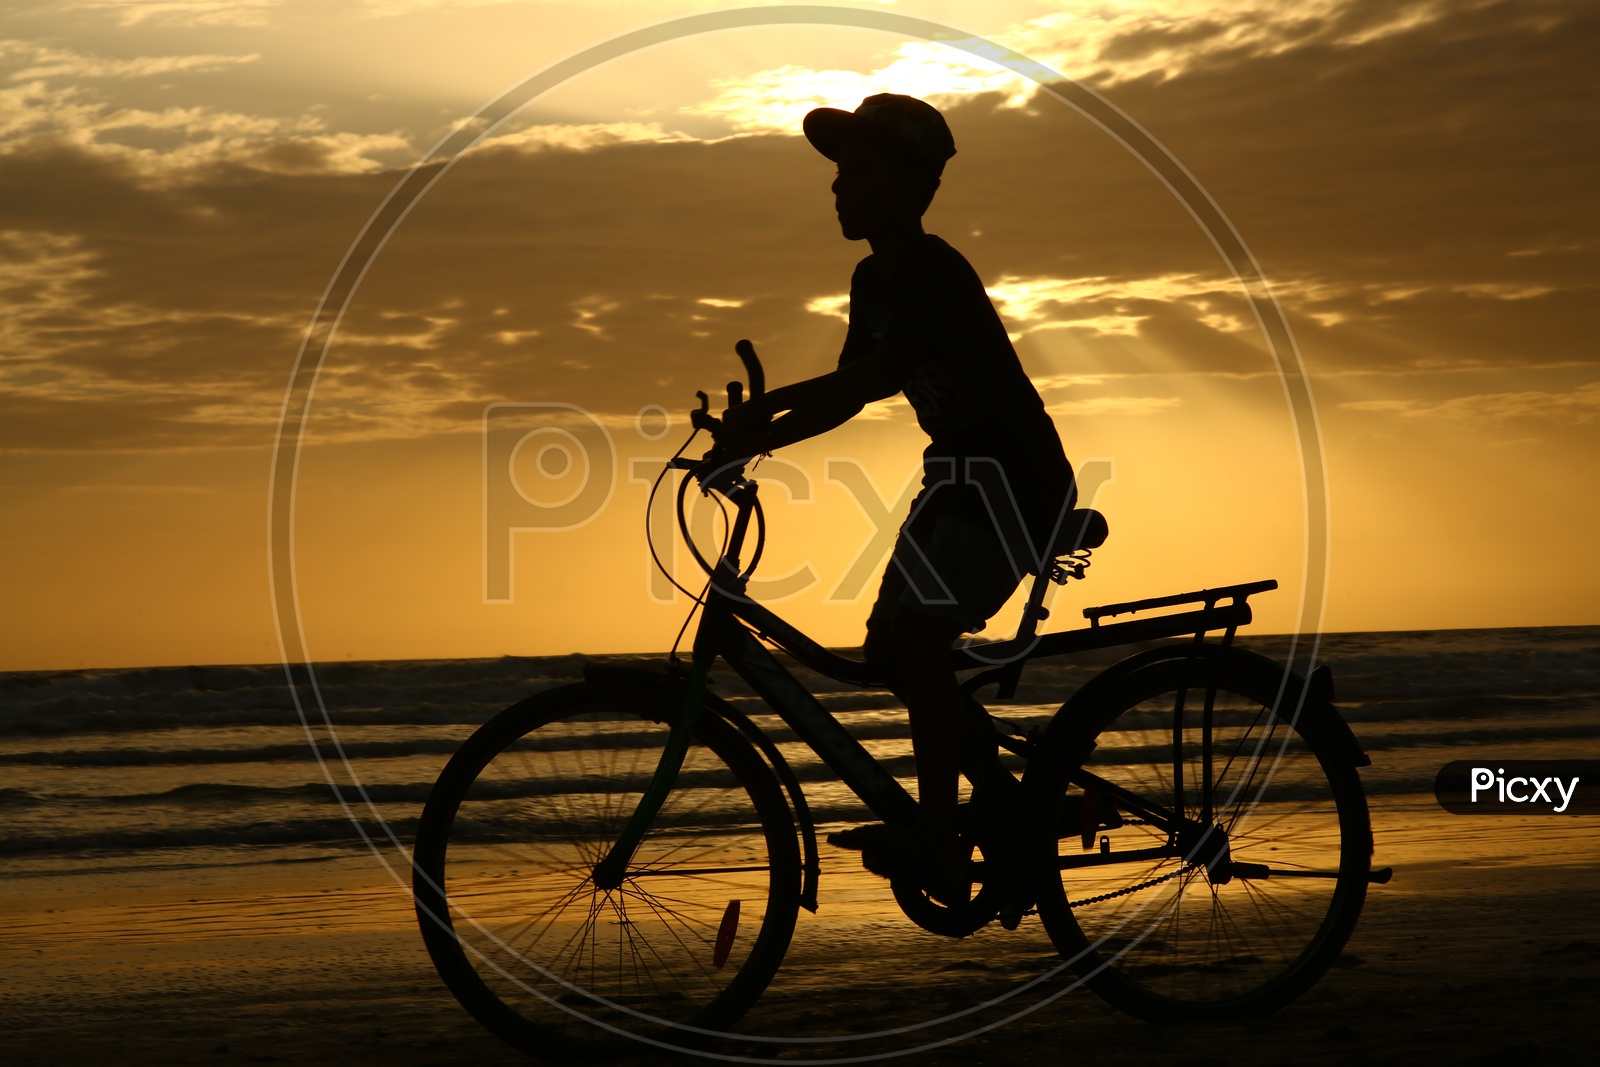 Young Boy Riding Bicycle Over a Golden Sunset Sky In Background At a Beach in Goa